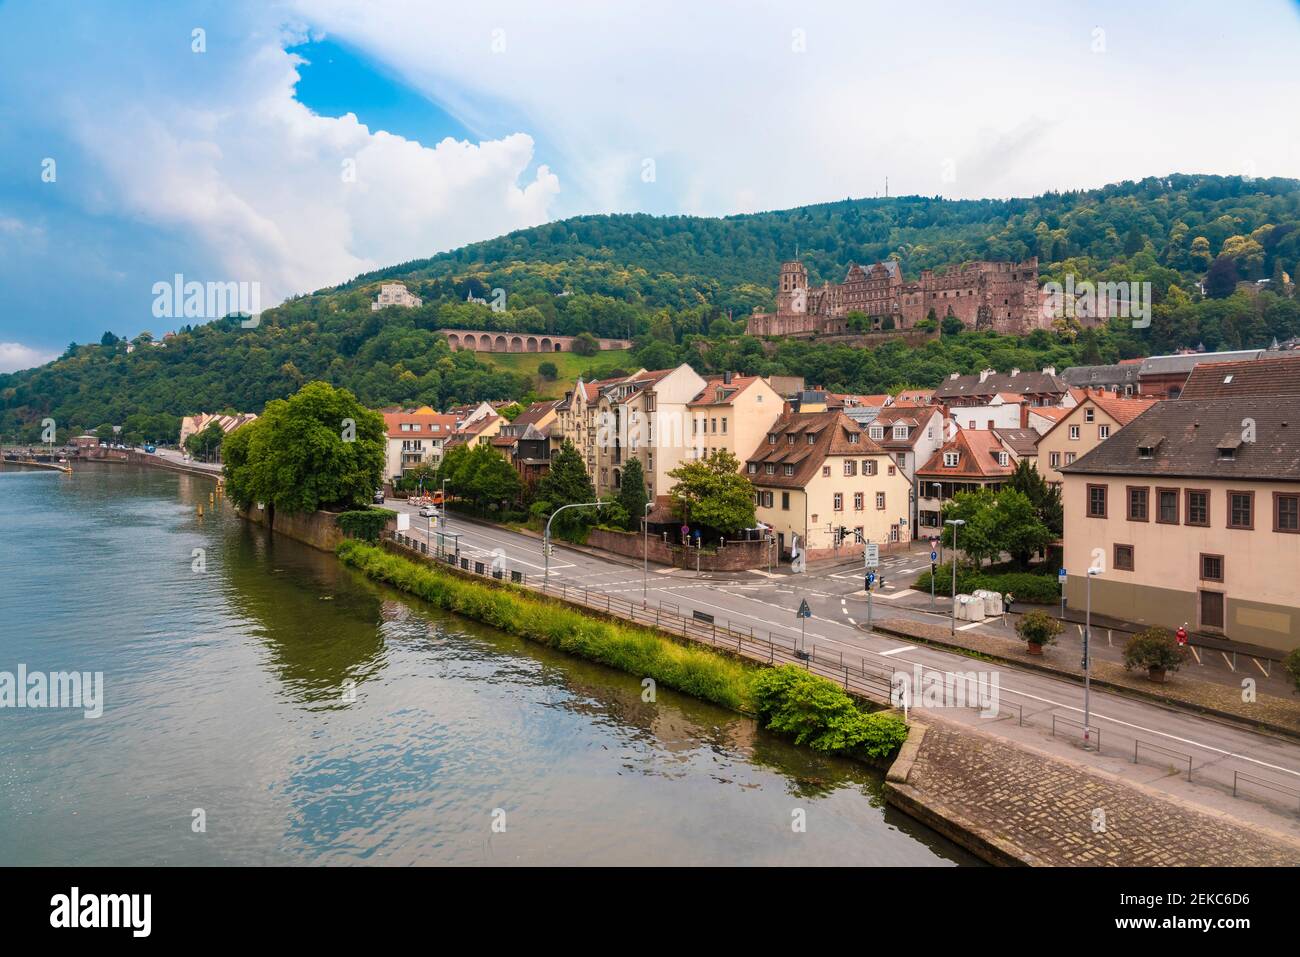 Germany, Baden-Wurttemberg, Heidelberg, Bank of Neckar with old town buildings and Heidelberg Castle in background Stock Photo